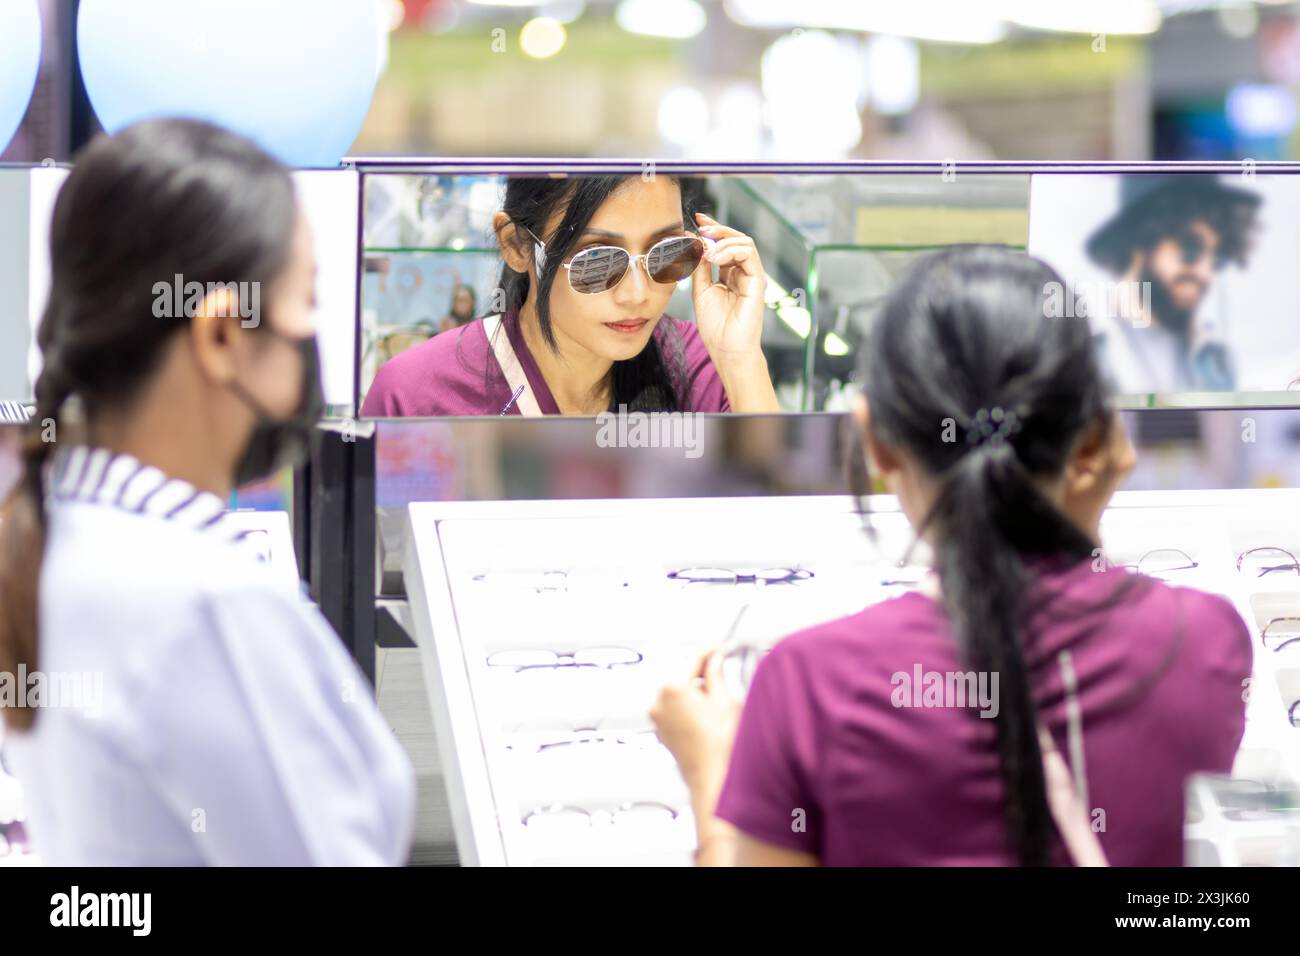 A young woman tries sunglasses at the mirror in an optical shop with the assistance of a saleswoman Stock Photo